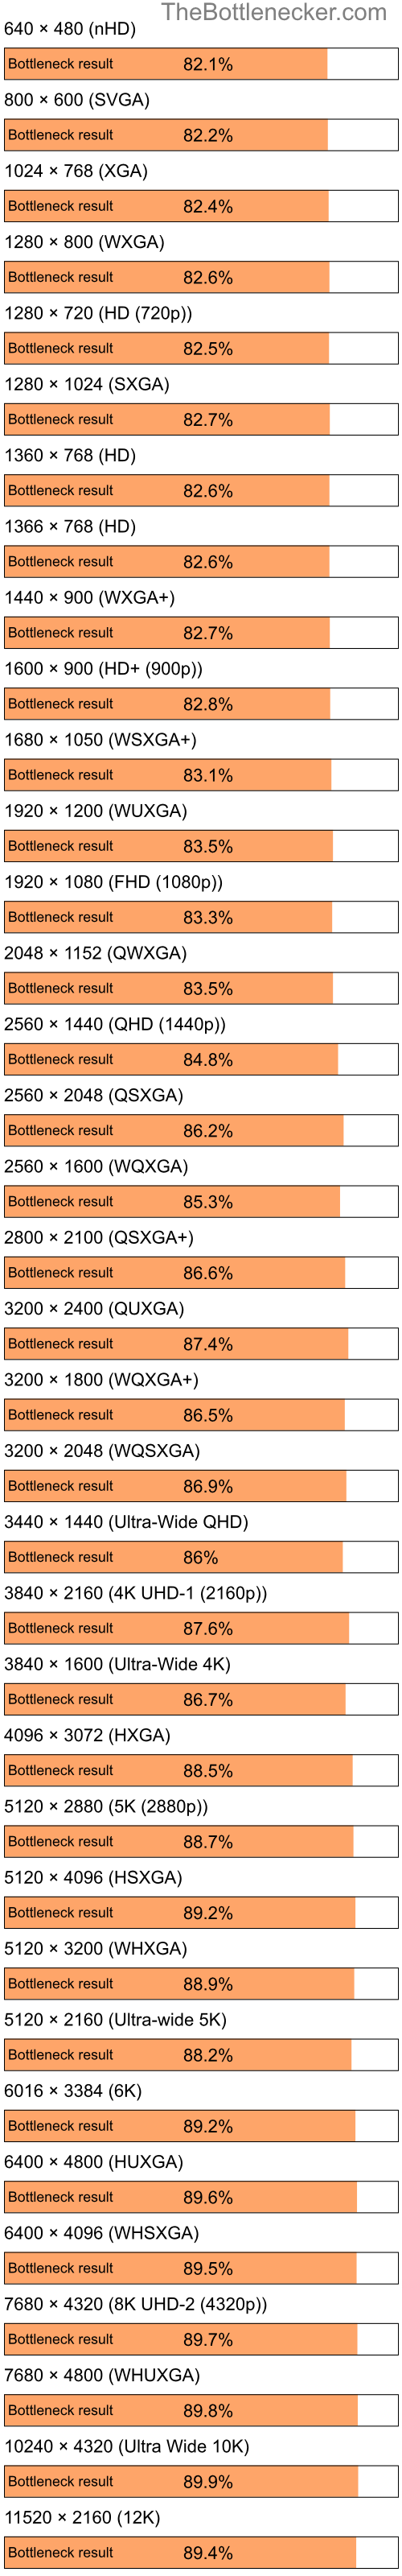 Bottleneck results by resolution for Intel Pentium 4 and NVIDIA GeForce 6150 LE in Graphic Card Intense Tasks